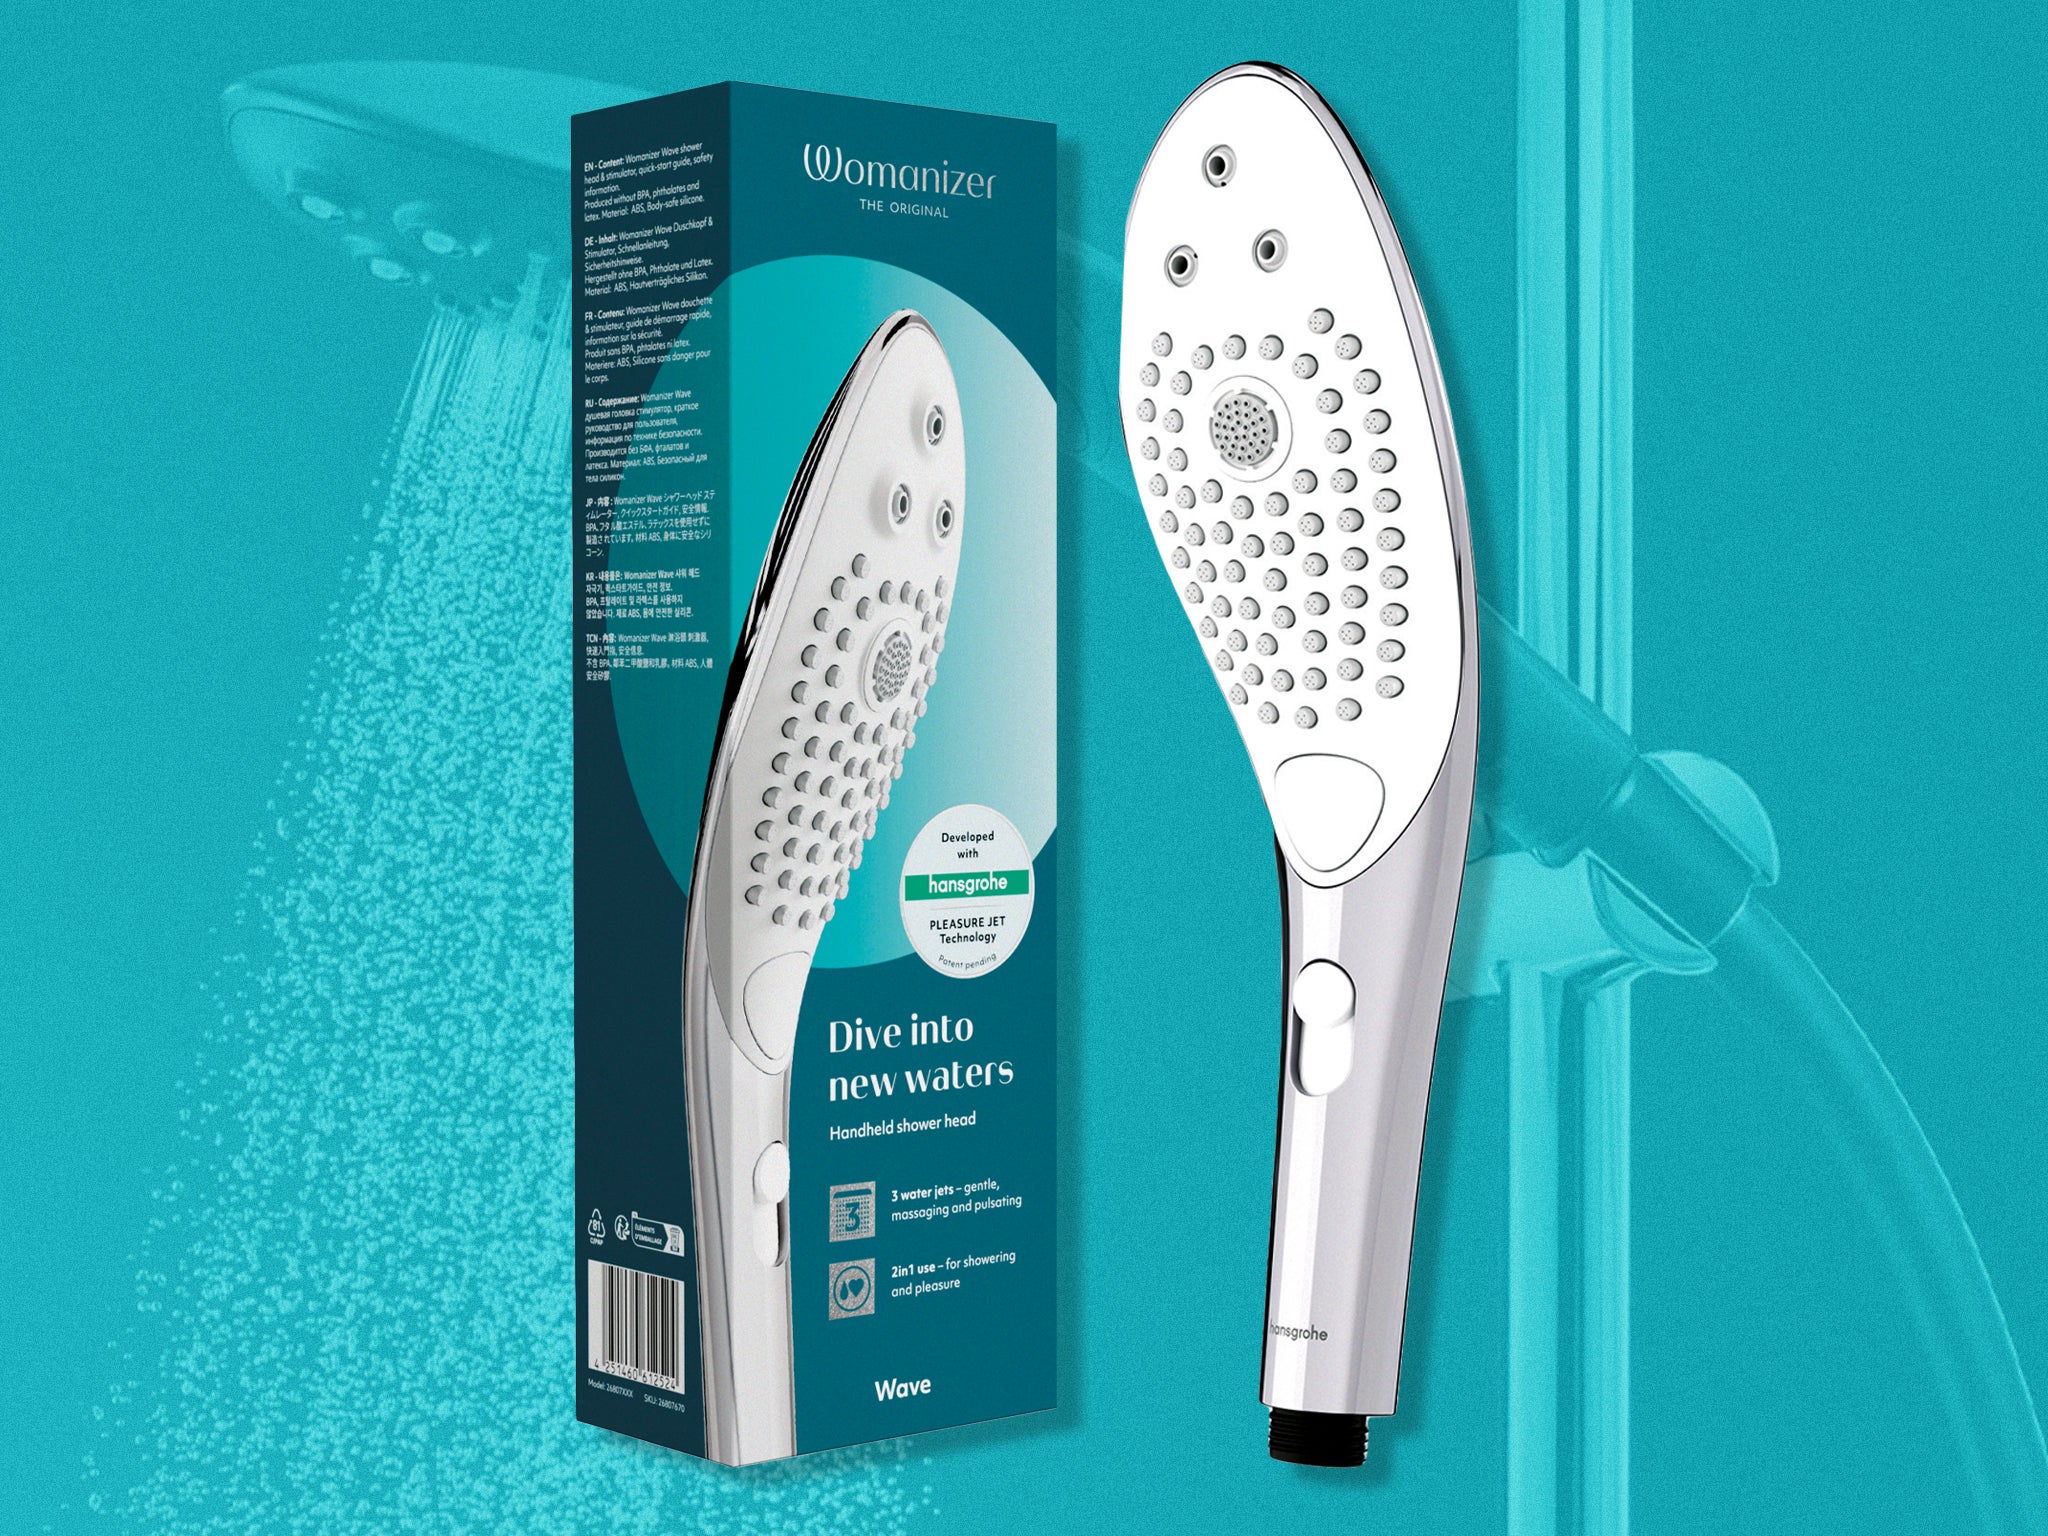 Take your shower experience to the next level with the Womanizer Wave